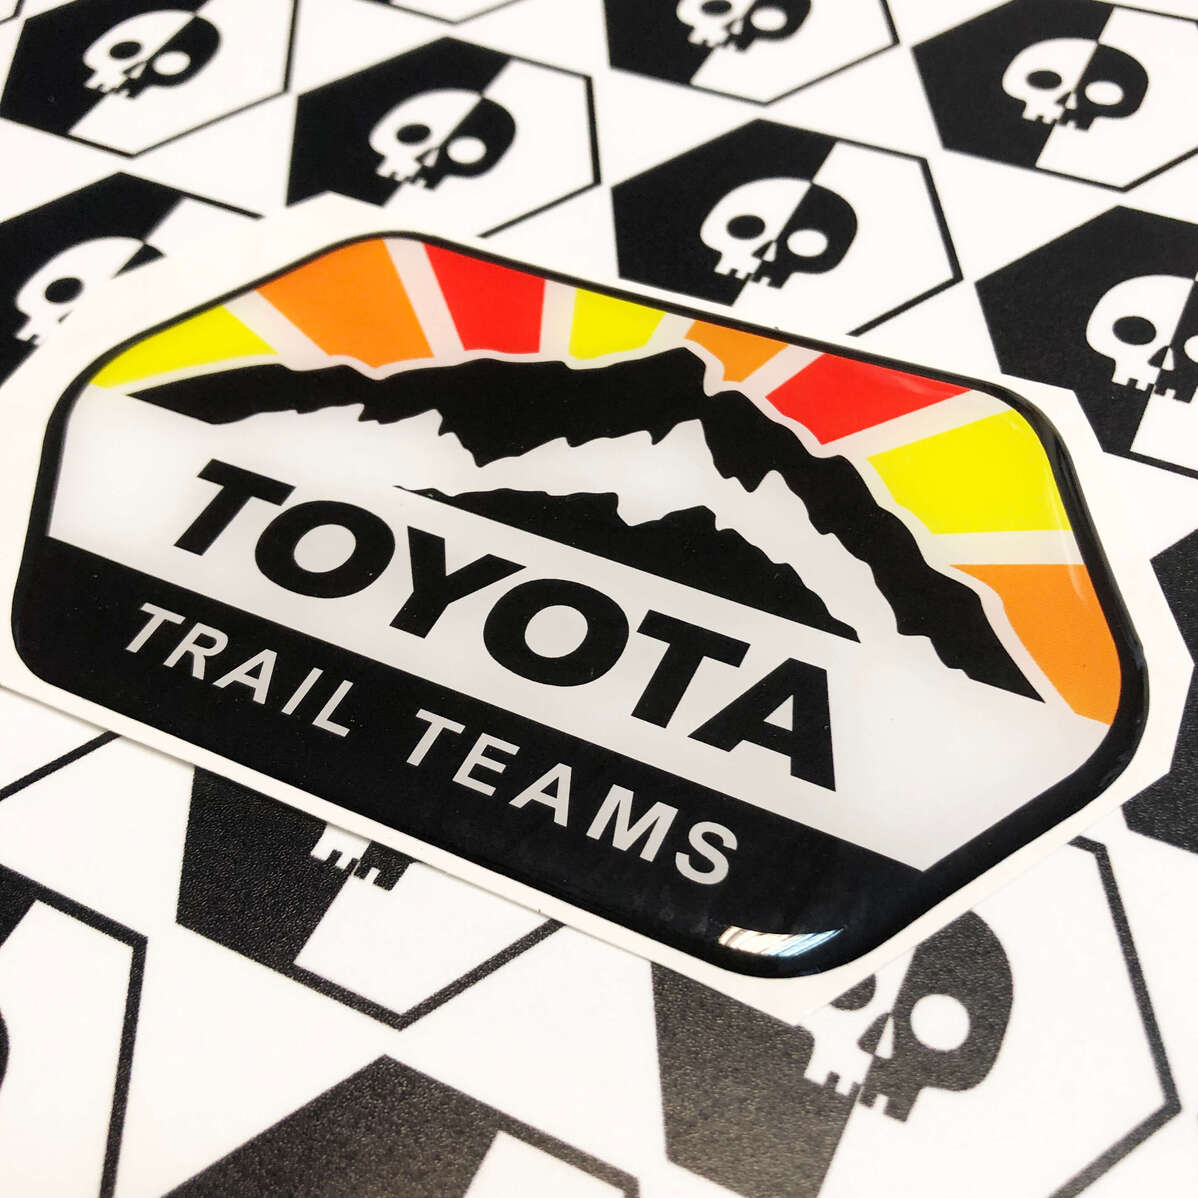 2 Decals Toyota Trail Teams Mountains Vintage Sun Colors Badge Emblem Domed Decal